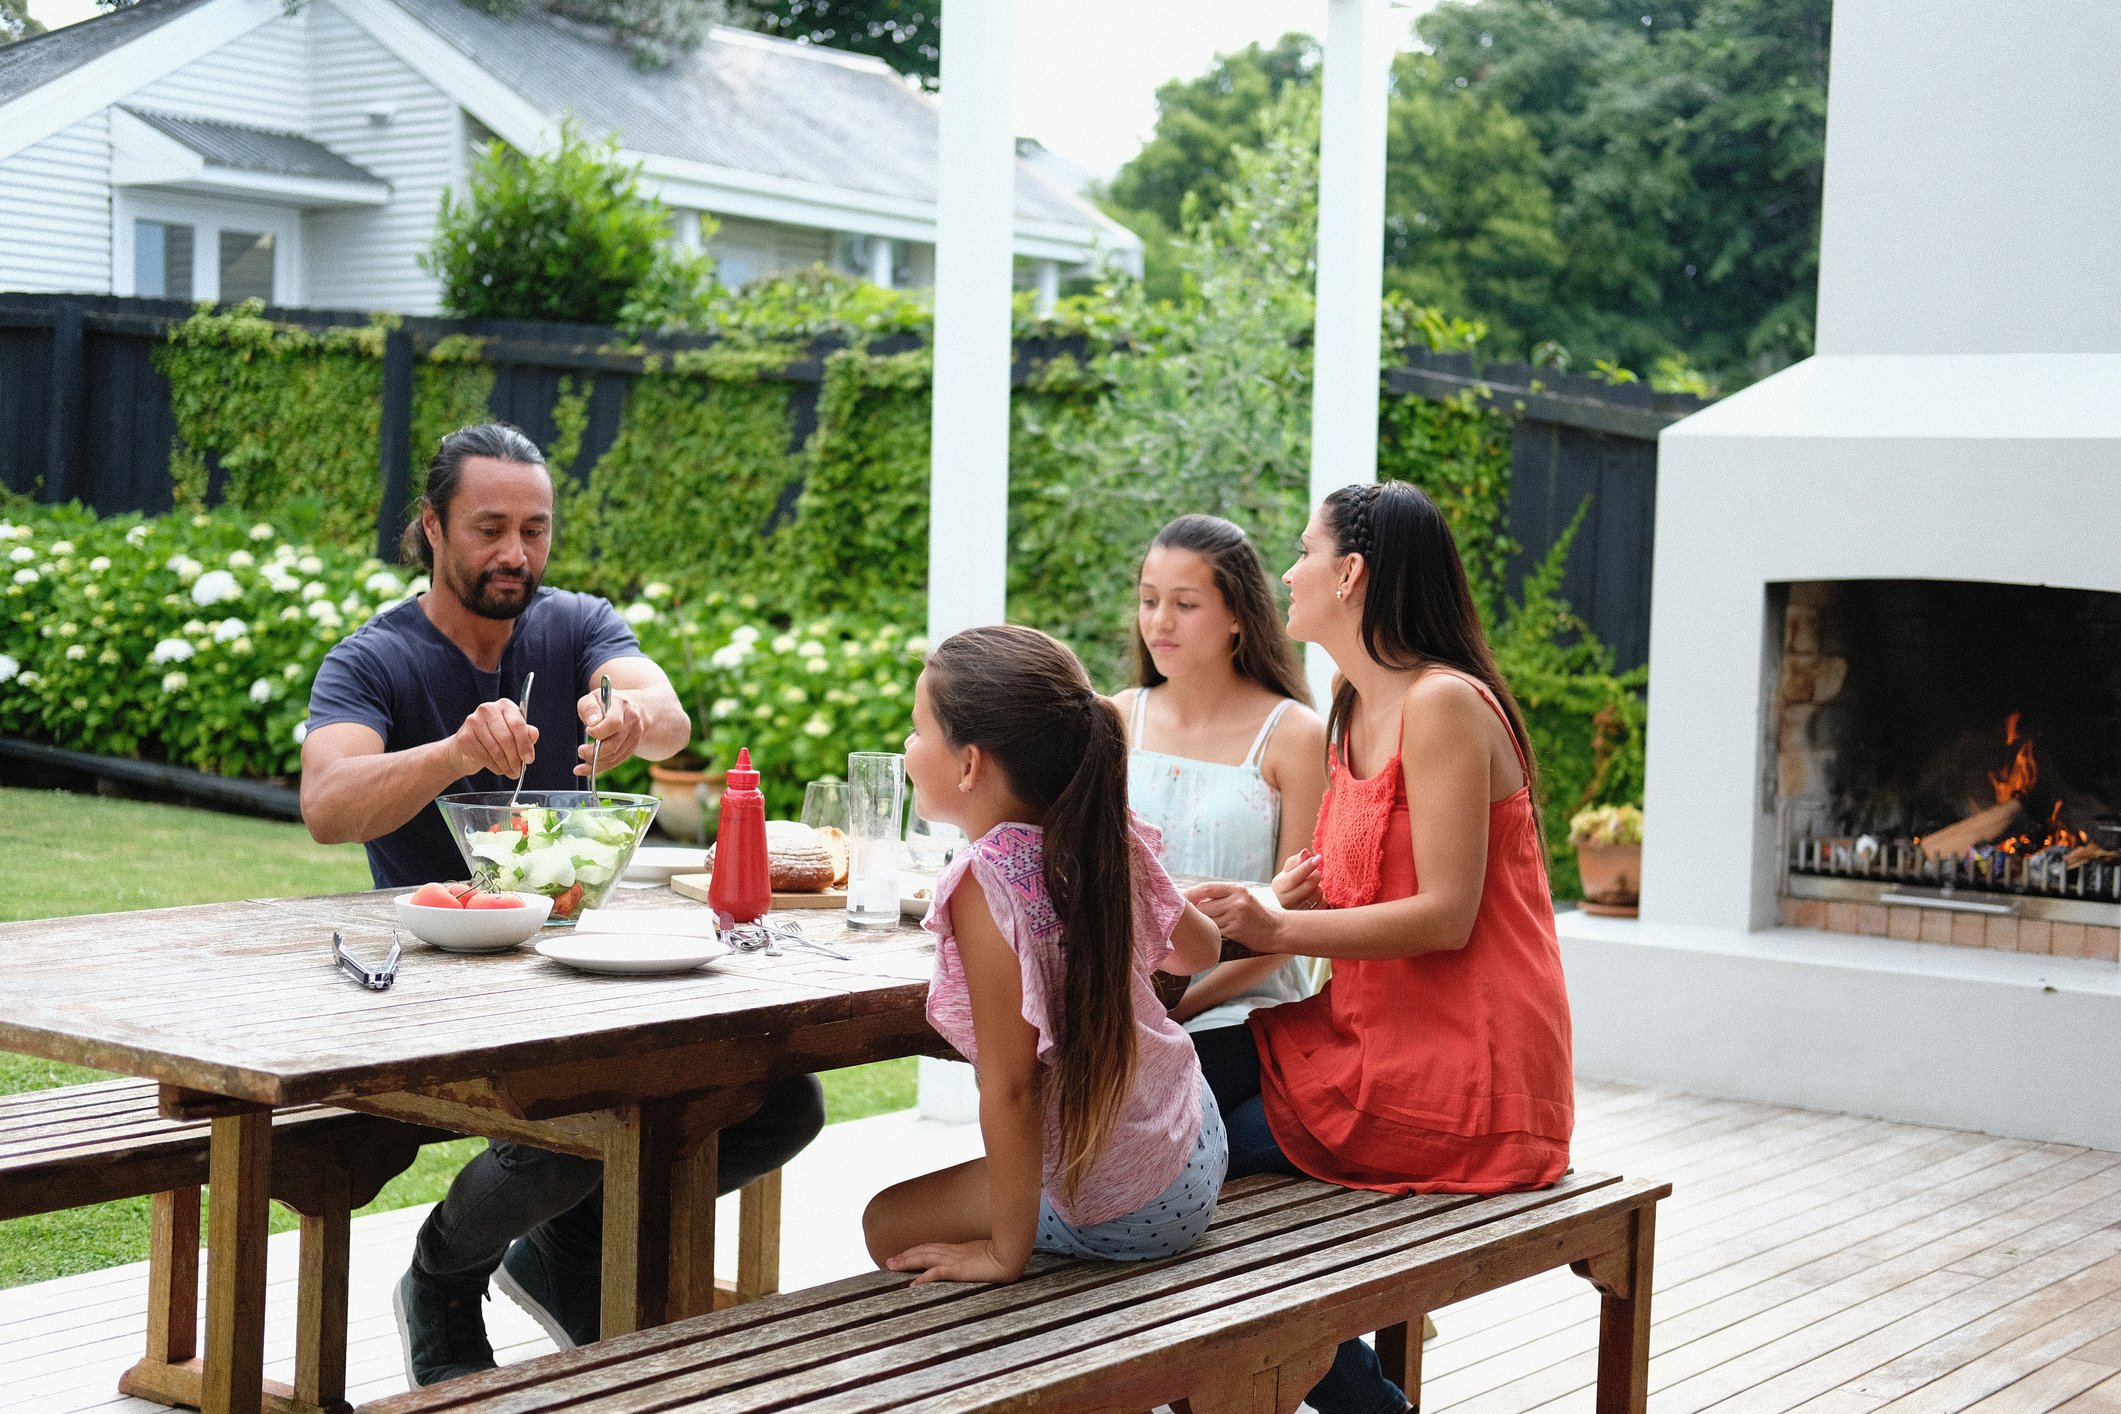 A family of four - mother, father and two young daughters - are enjoying a summer lunch on the outdoor backyard patio of their home